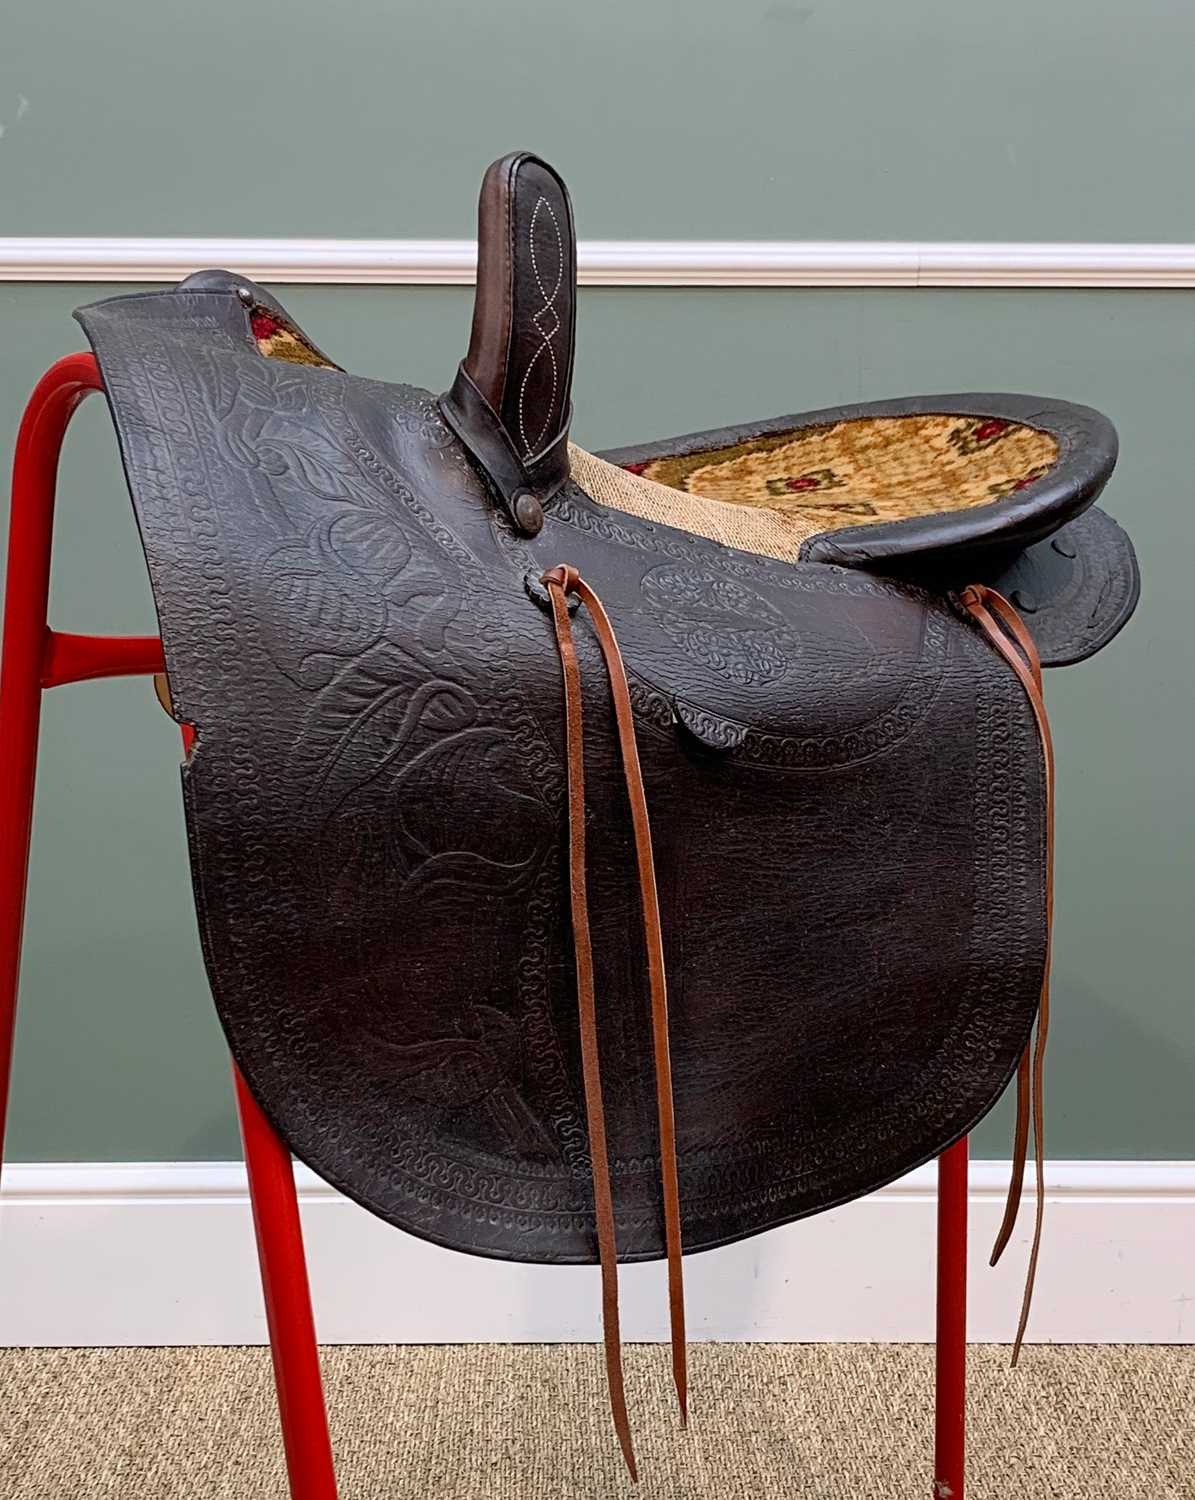 THE EQUESTRIAN CLUB HOUSE: TEXAS SIDE SADDLE, c. 1880, tooled leather and carpet seat, 66cms long - Image 3 of 5